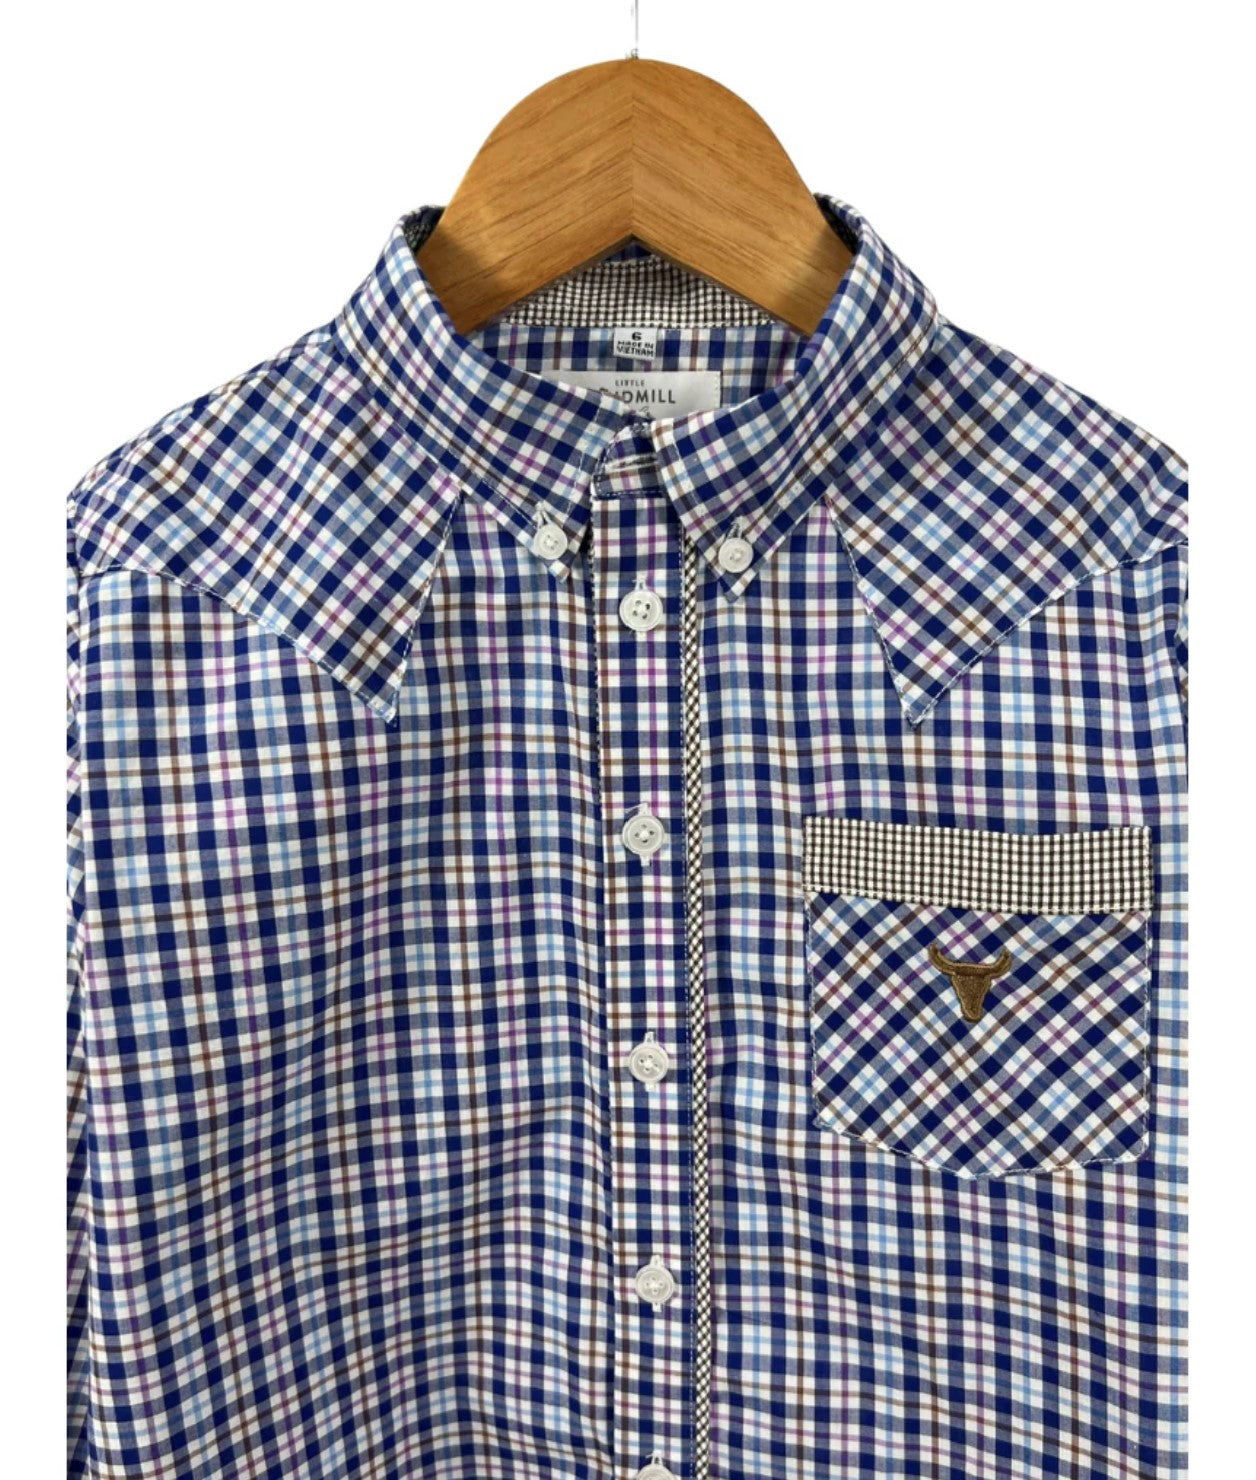 Parker - Classic Gingham Long Sleeve Shirt - Baby & Toddler